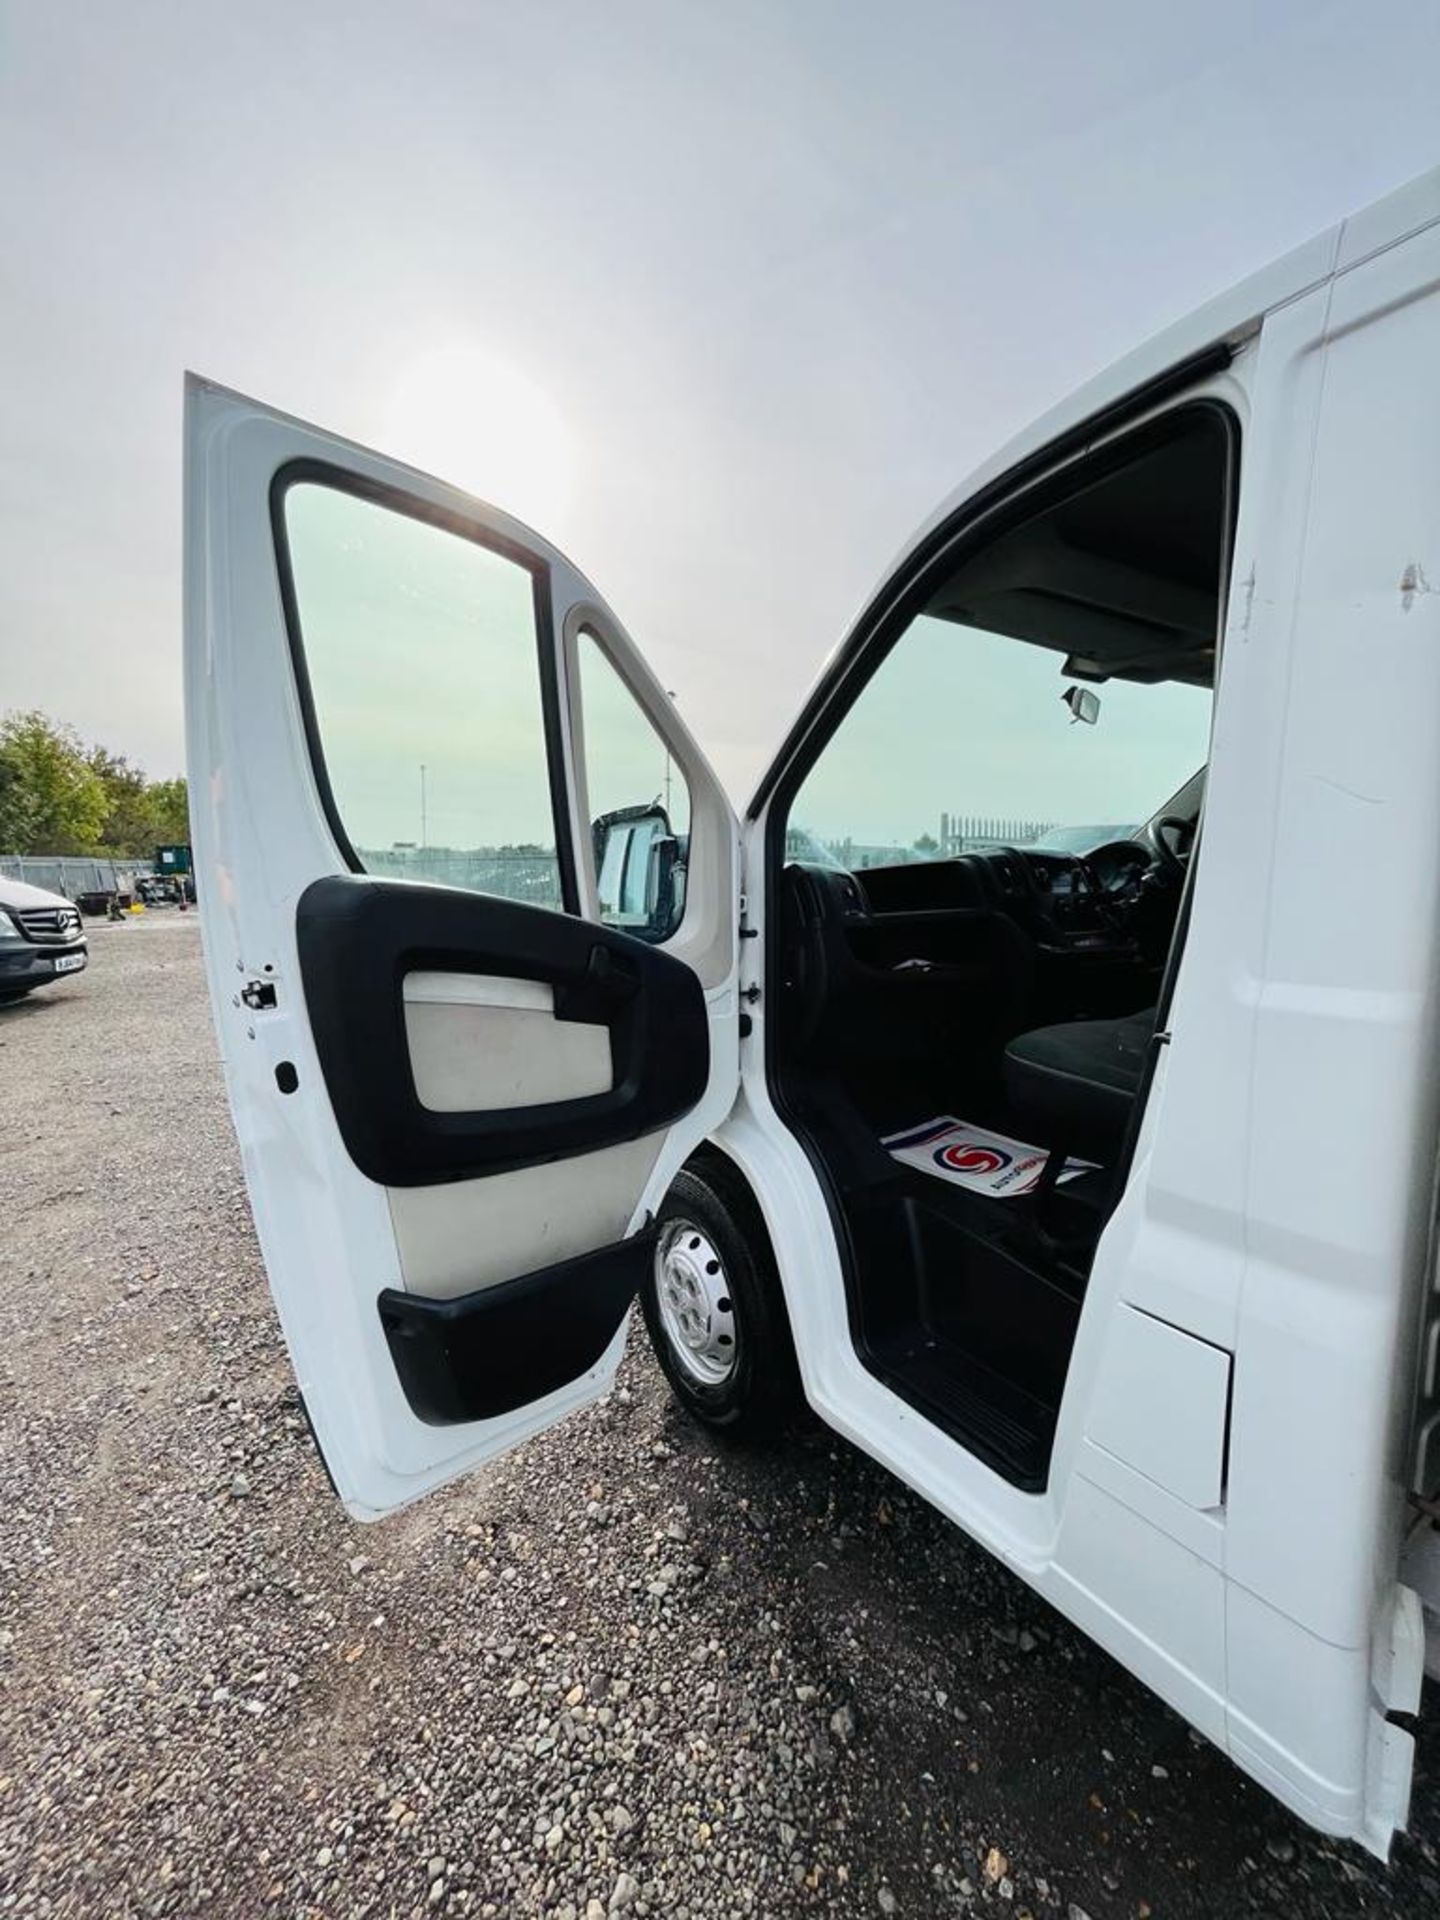 ** ON SALE ** CITROEN RELAY 35 2.2 HDI 130 L3 2015 (15 Reg) - Alloy Dropside - Bluetooth Pack - Image 19 of 24